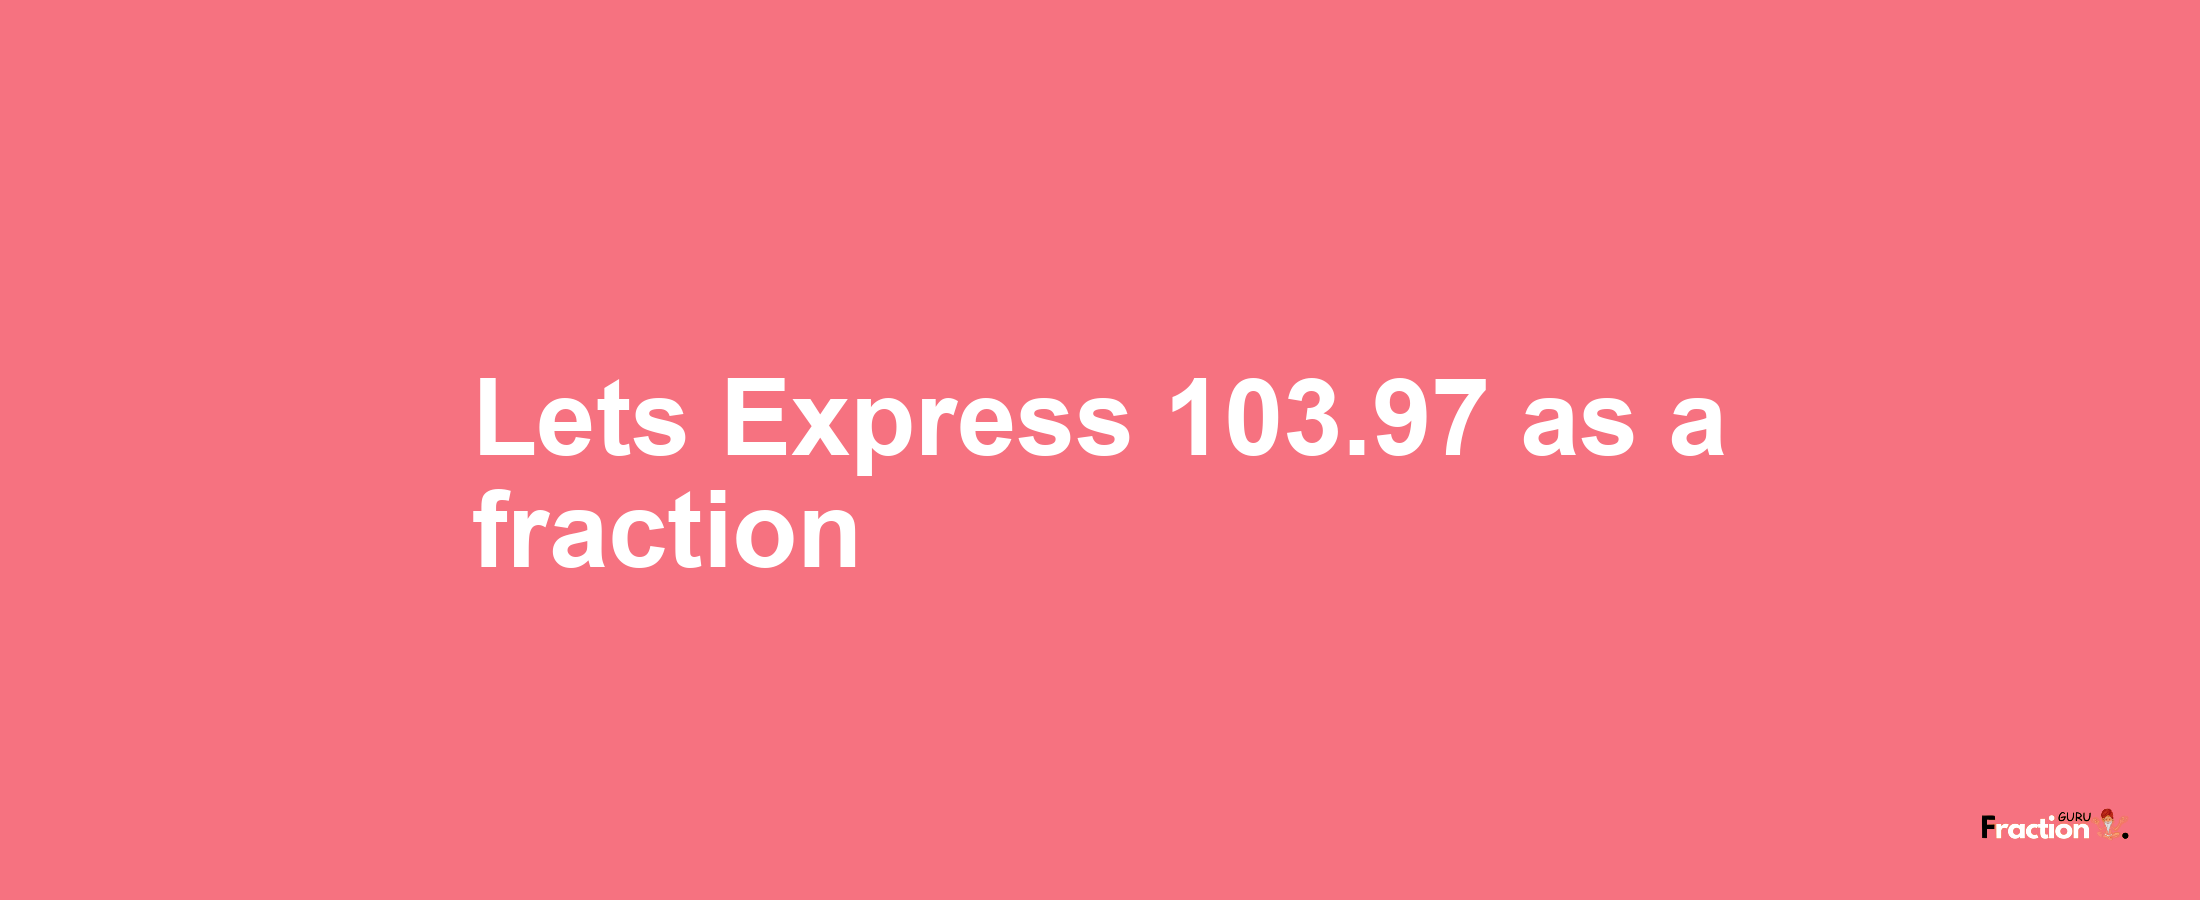 Lets Express 103.97 as afraction